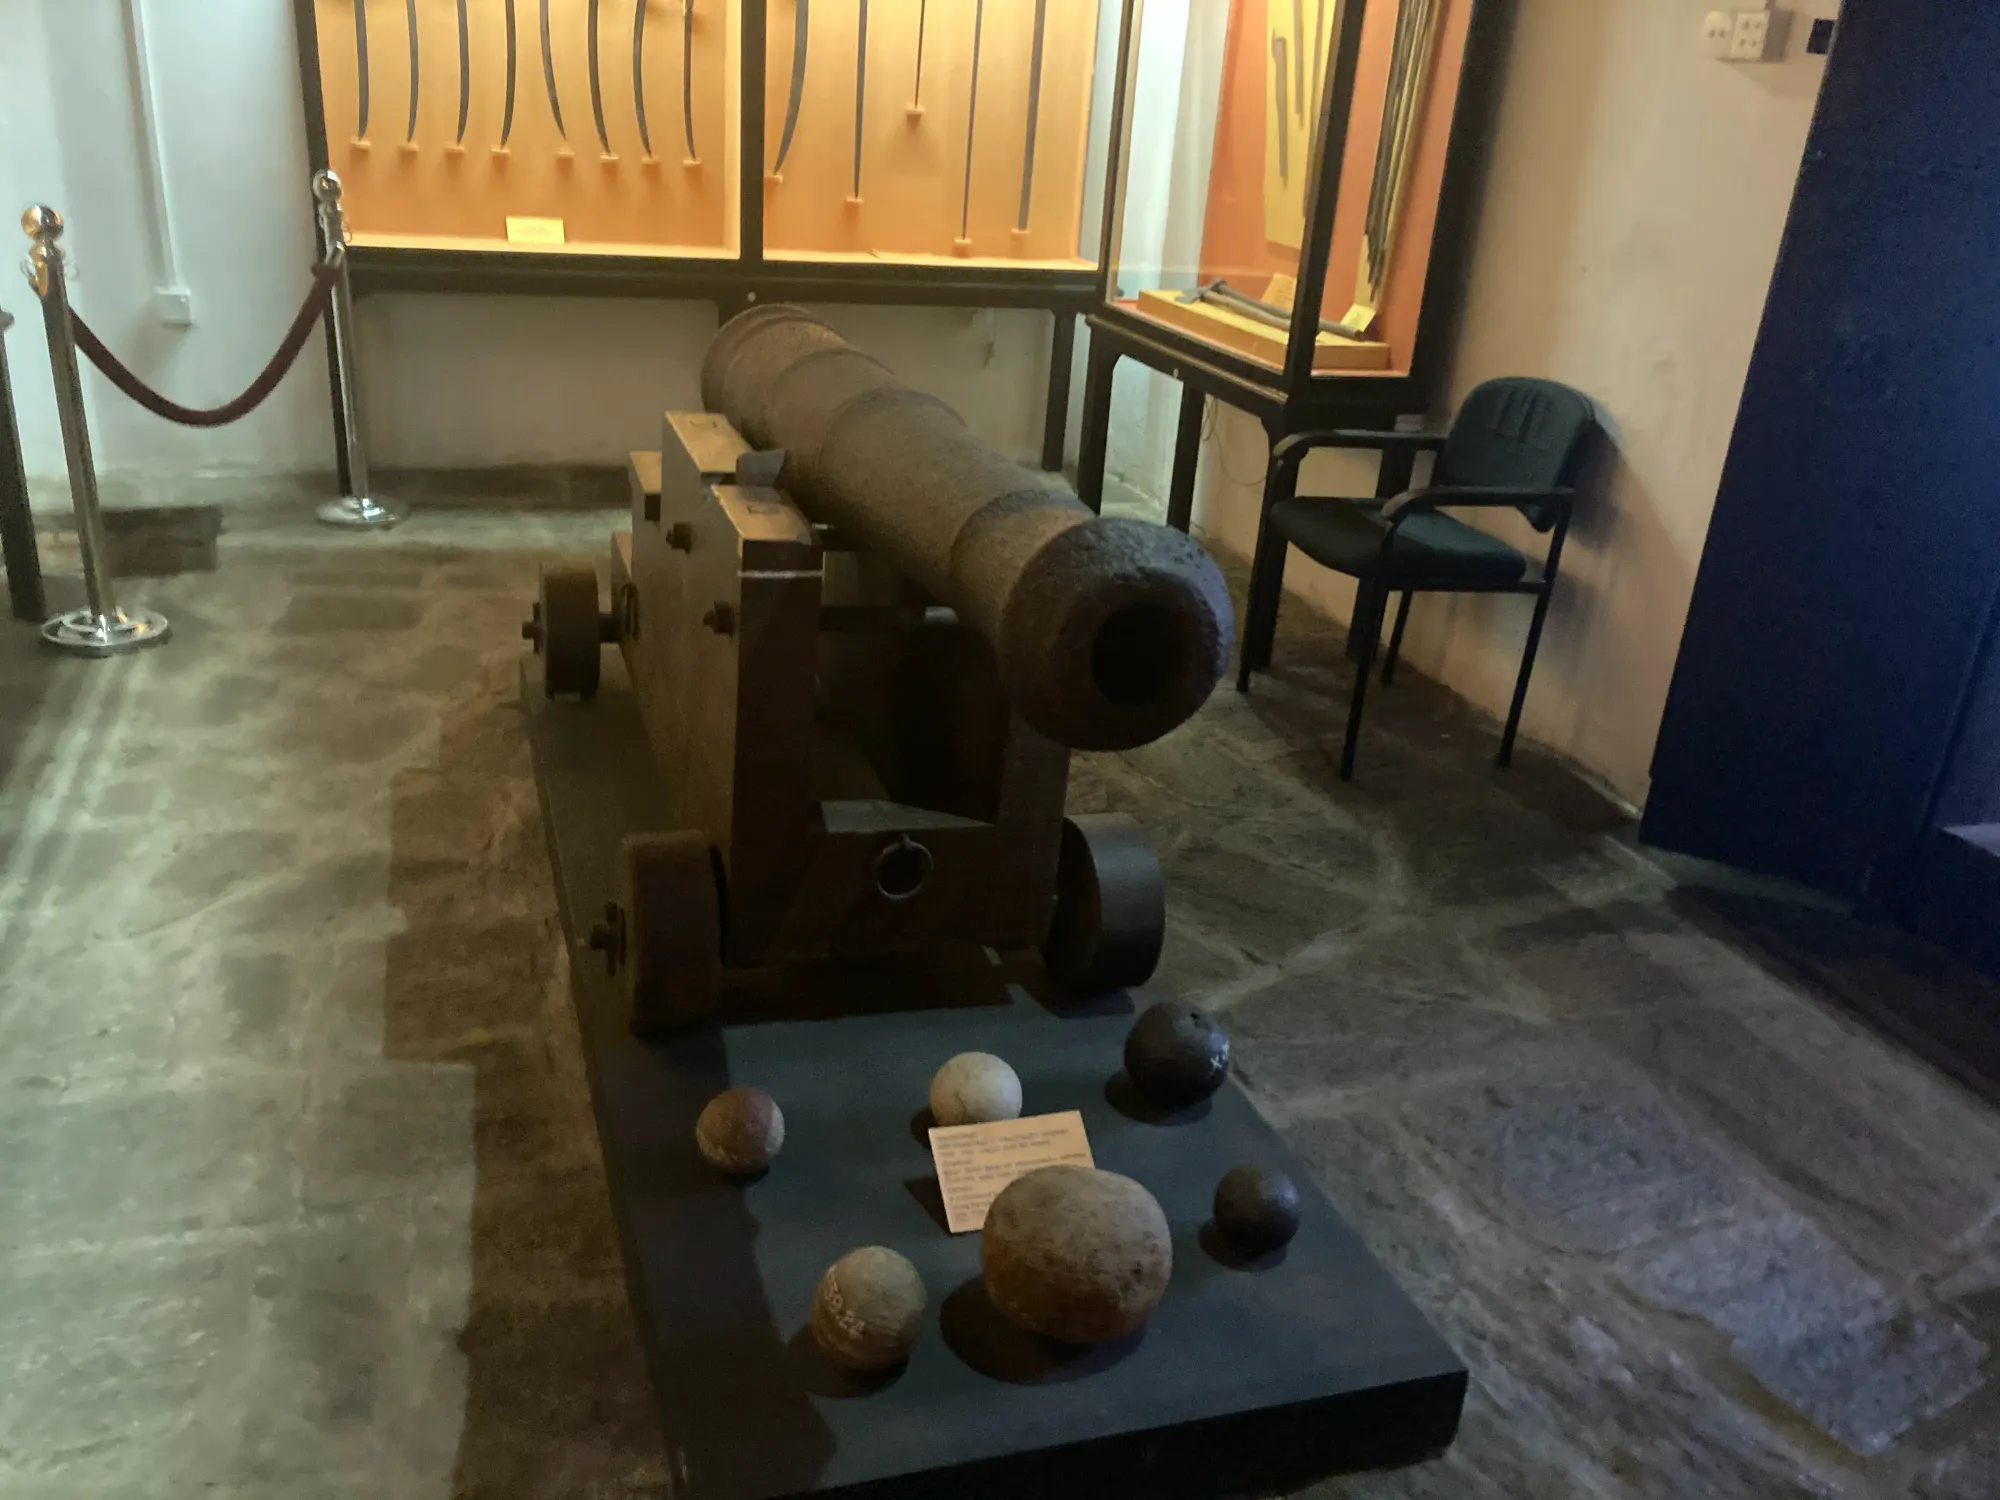 A cannon of the Kandyan era shown at the Kandy National Museum, Sri Lanka